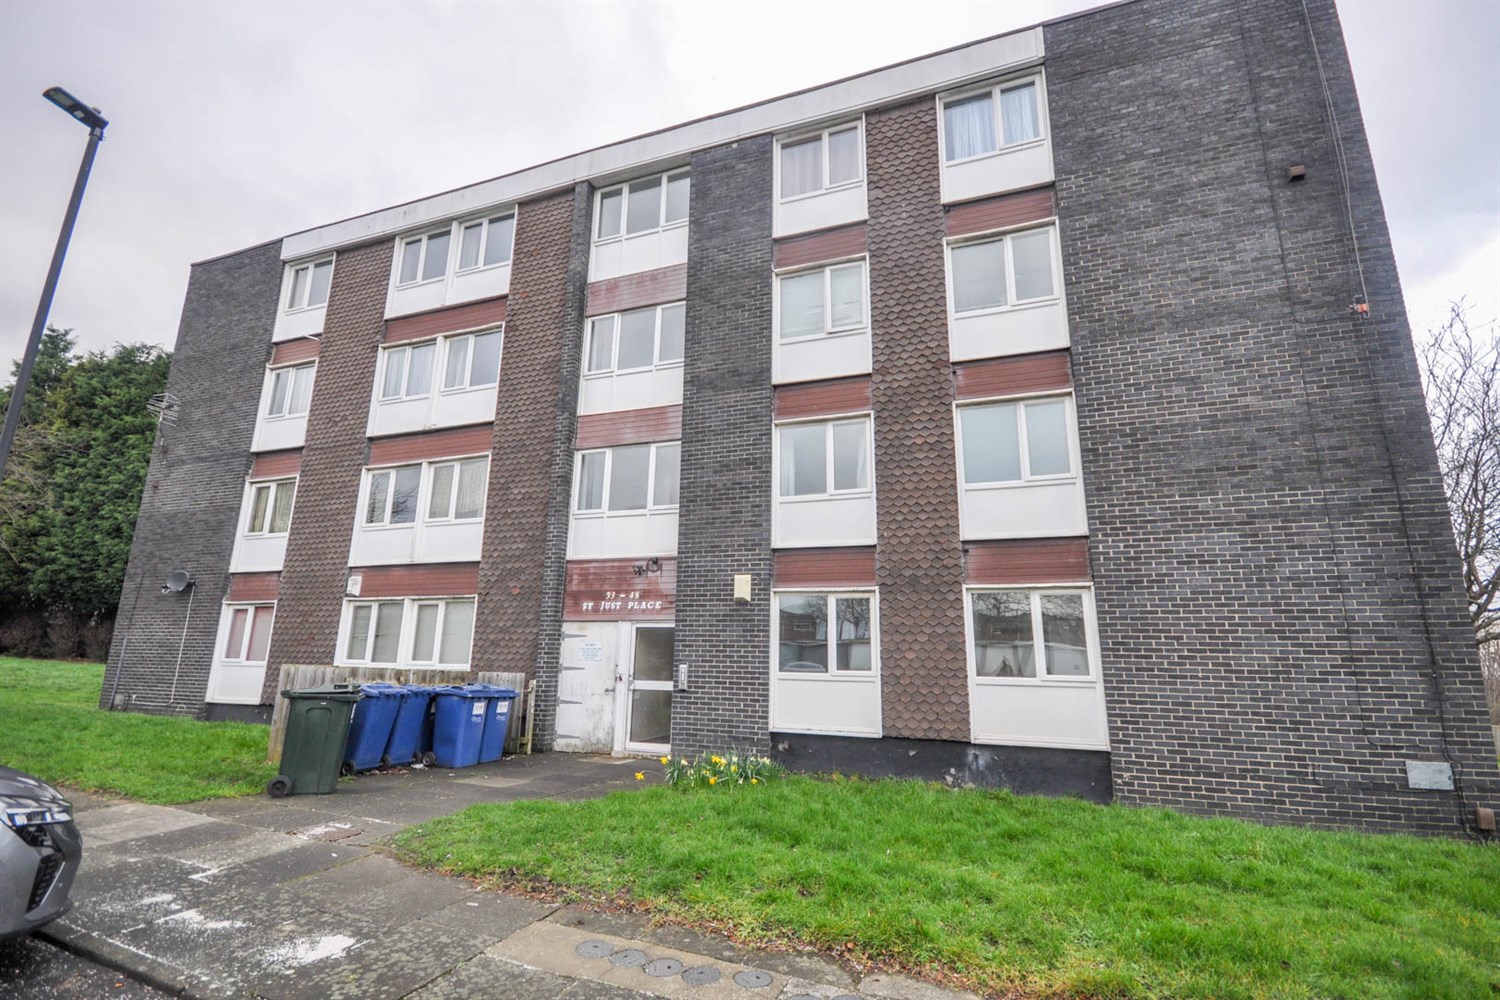 1 bed flat for sale in St. Just Place, Kenton - Property Image 1